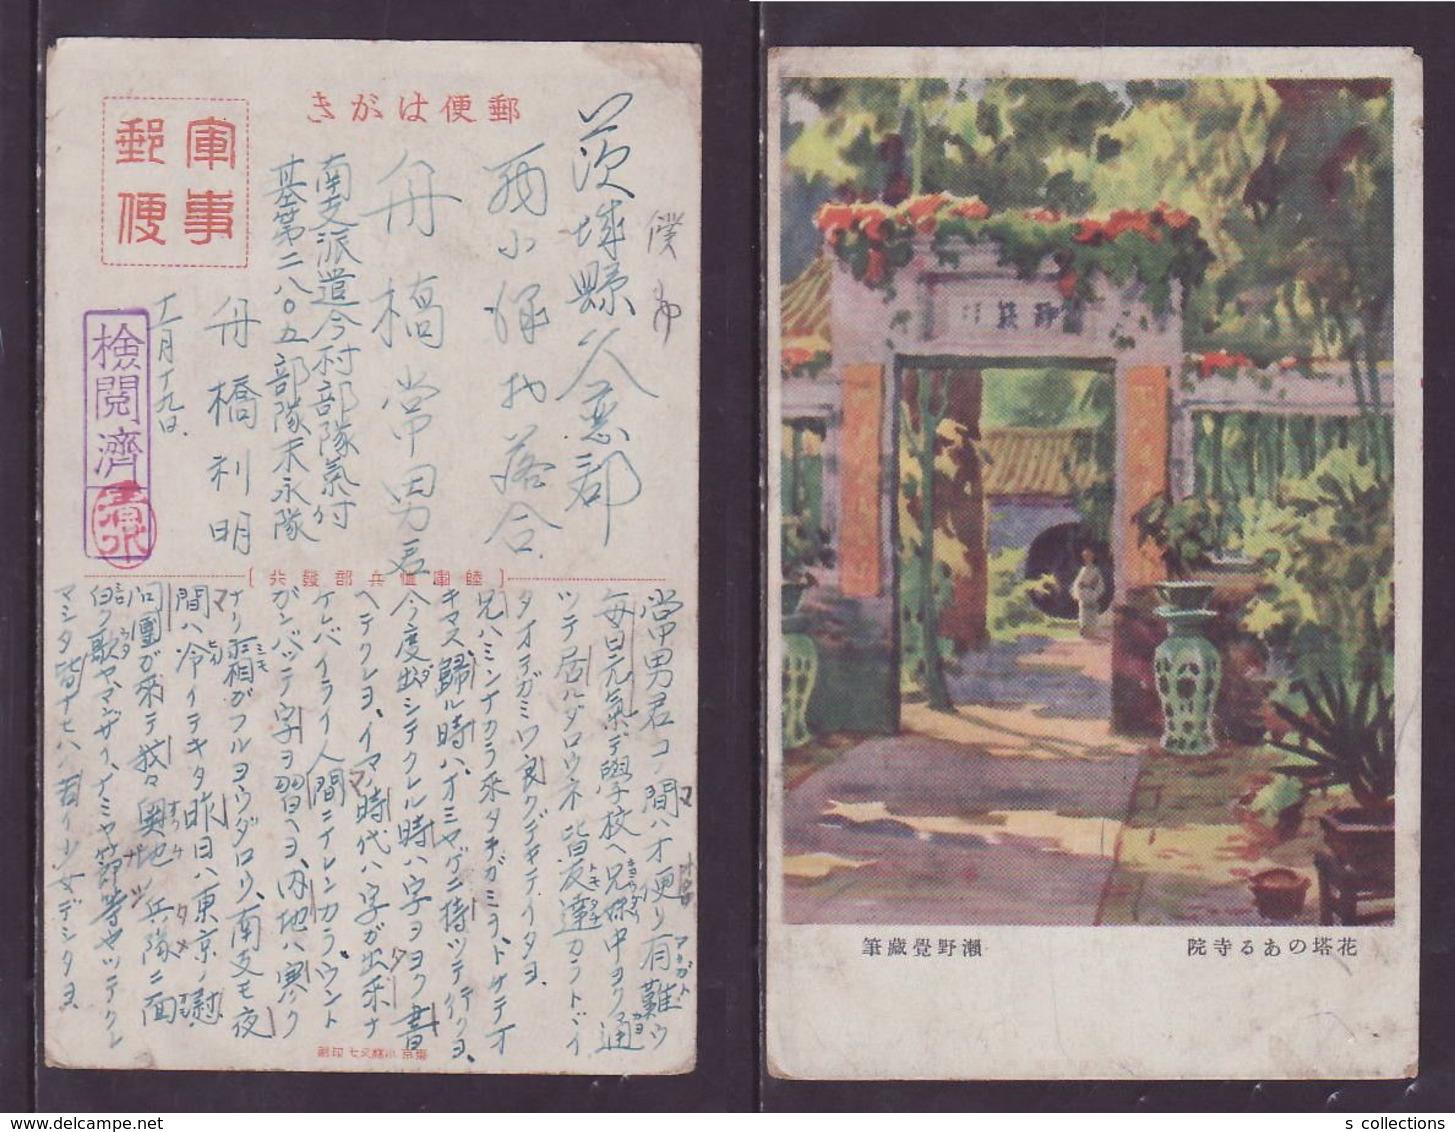 JAPAN WWII Military Flower Tower Temple Picture Postcard South China WW2 MANCHURIA CHINE MANDCHOUKOUO JAPON GIAPPONE - 1943-45 Shanghai & Nankin